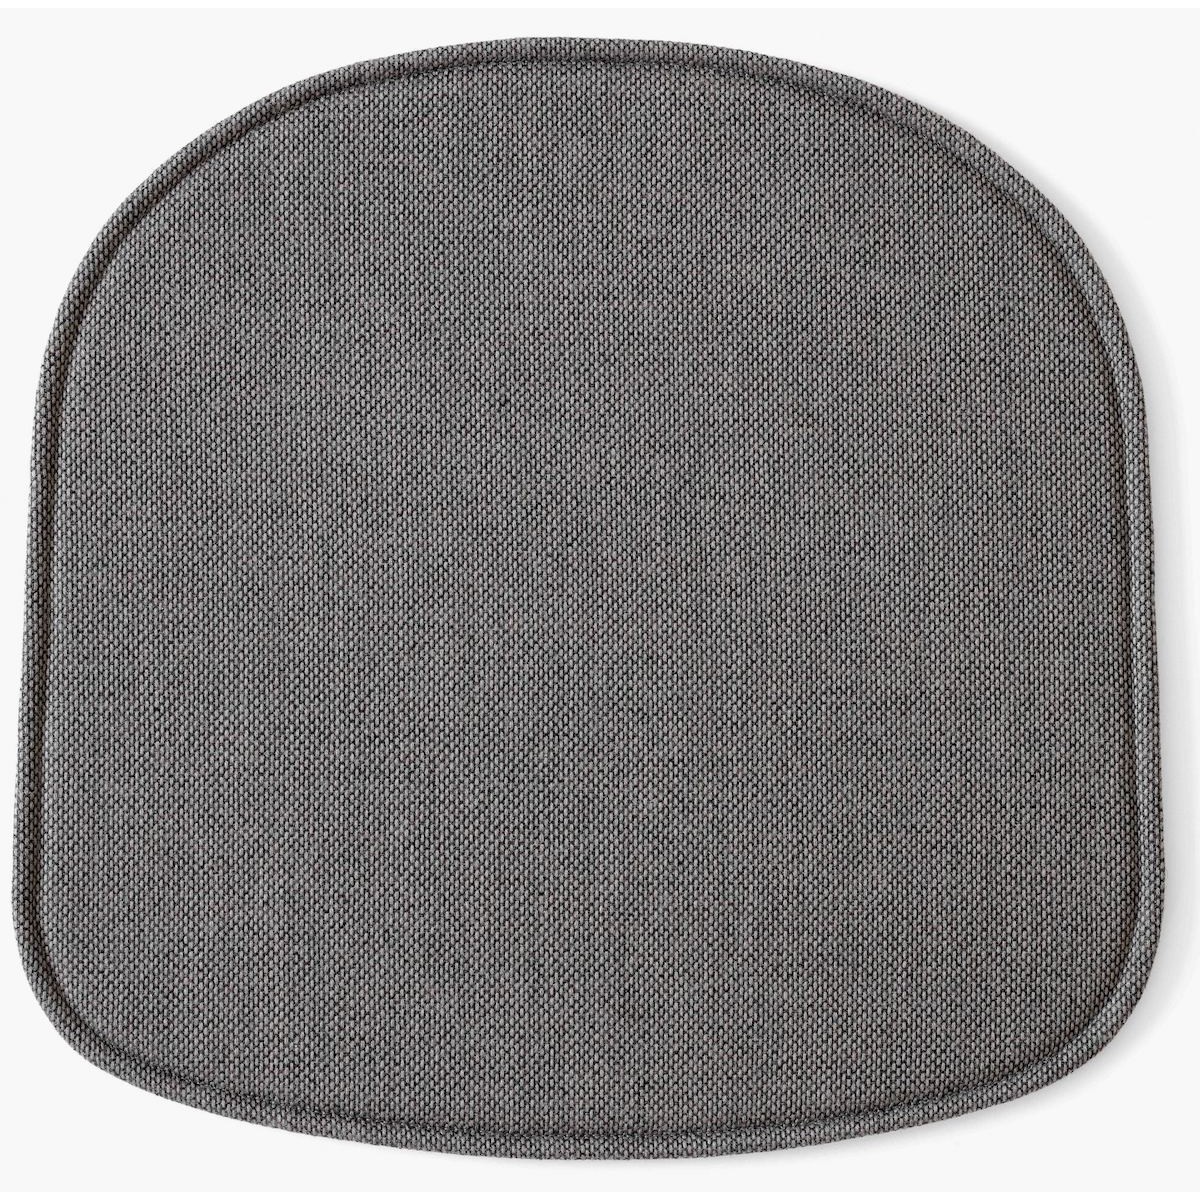 Rely HW6 Seat Pad – Re-Wool 158